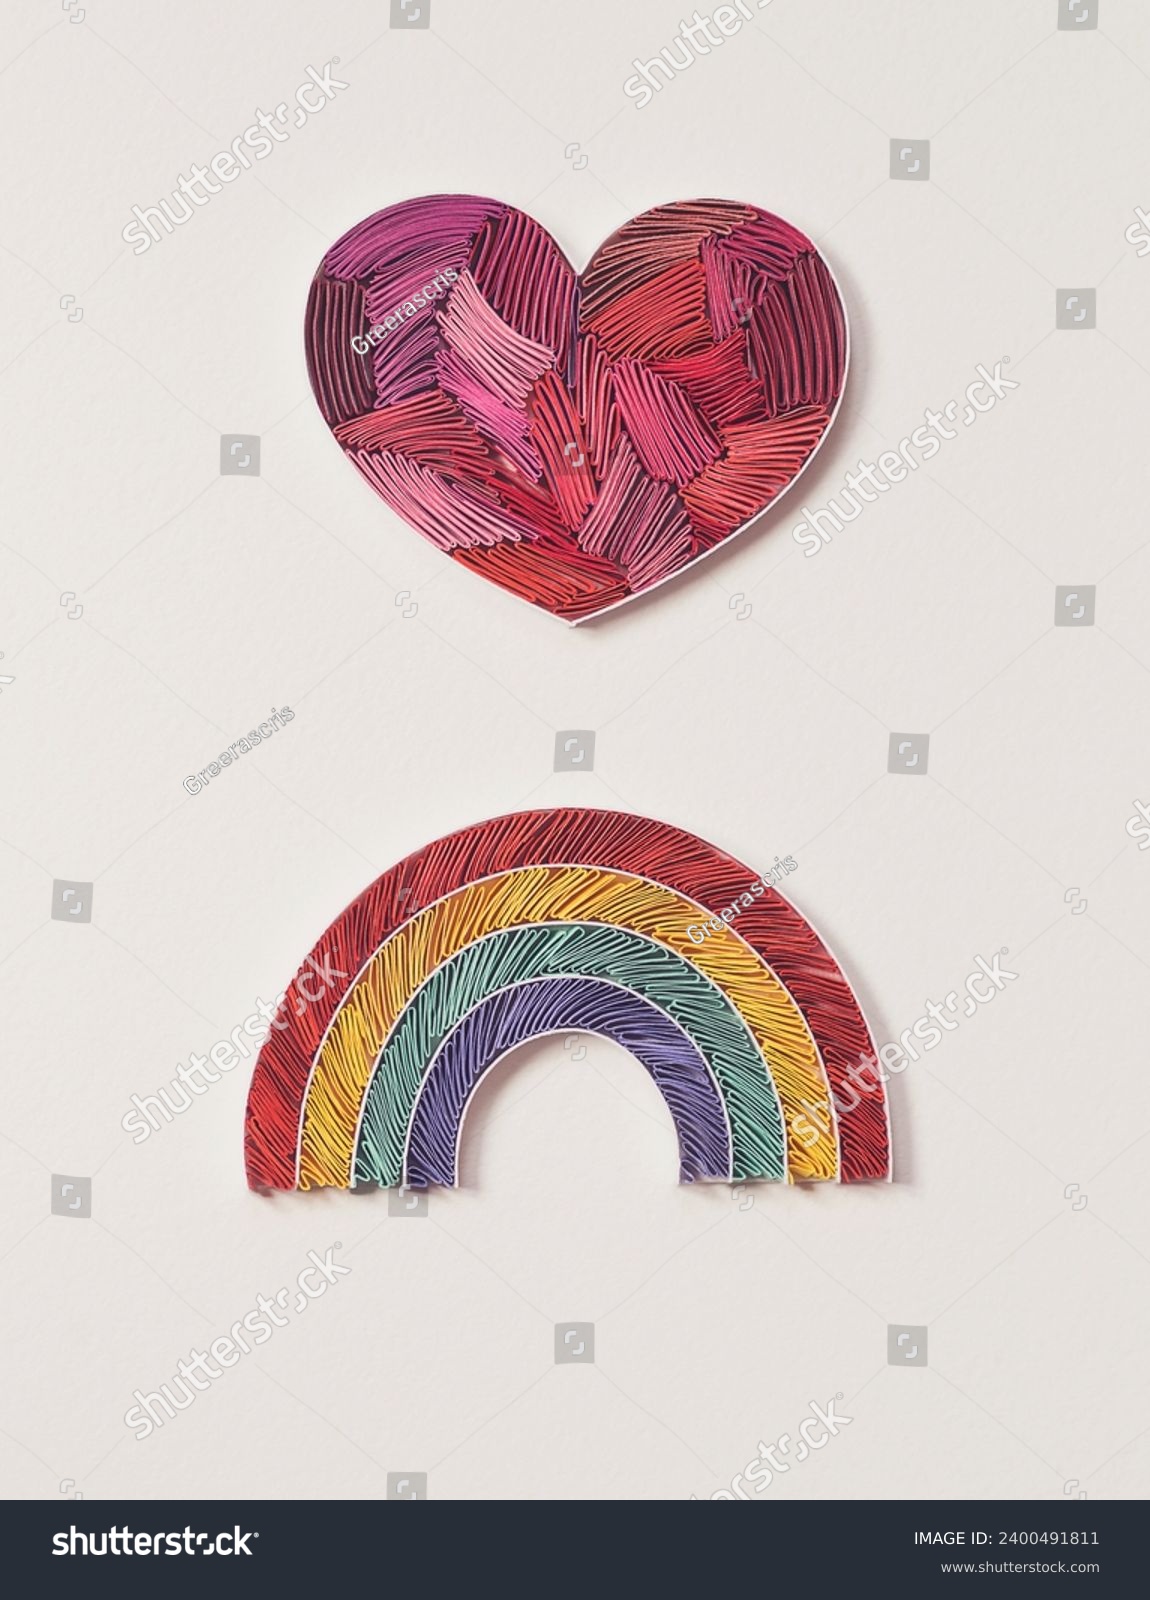 Paper heart and rainbow on white background. Happy valentine day, peace, LGBTQ+ community and love concept. symbol of community modern flat design peace sign. Hand made of paper quilling technique.  #2400491811